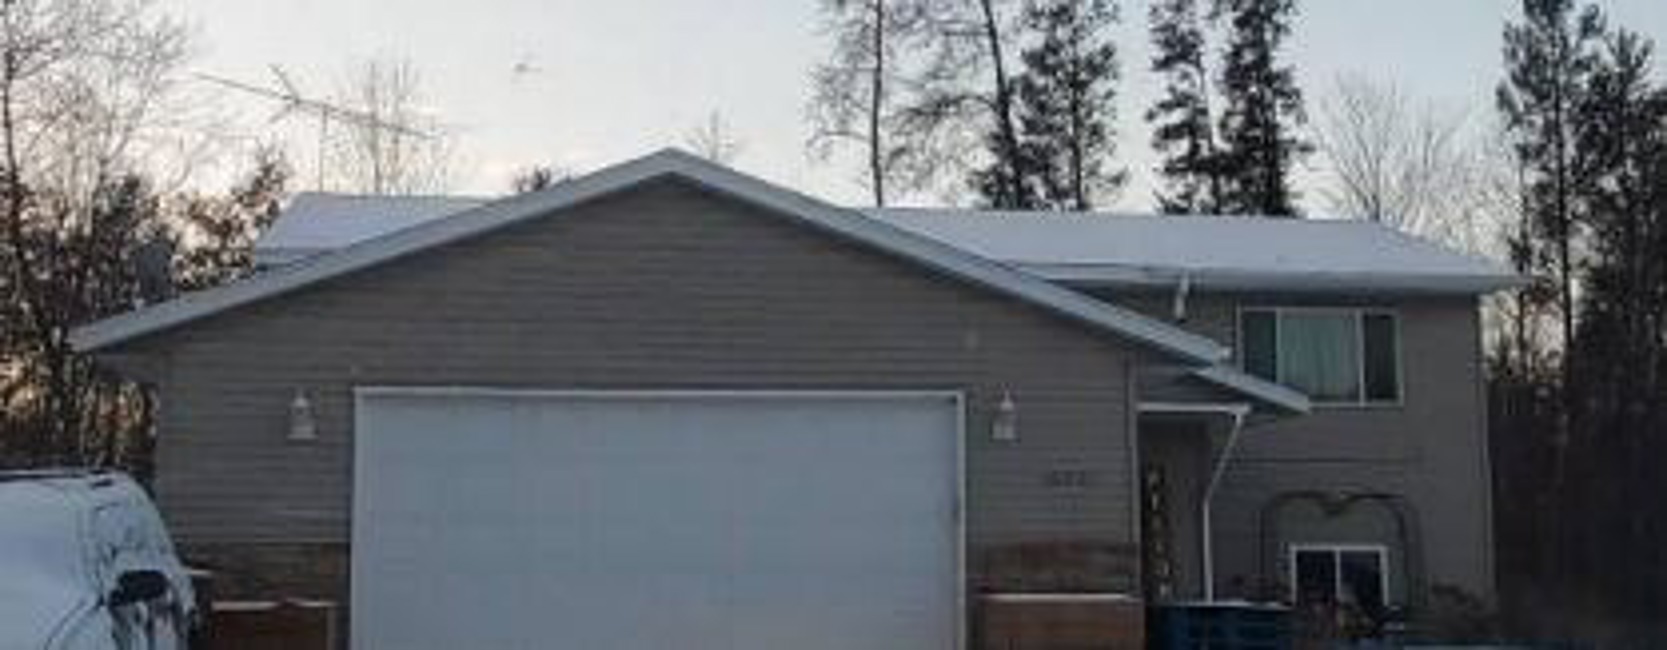 Foreclosure Trustee, 14905  Holly Dr, Baxter, MN 56425